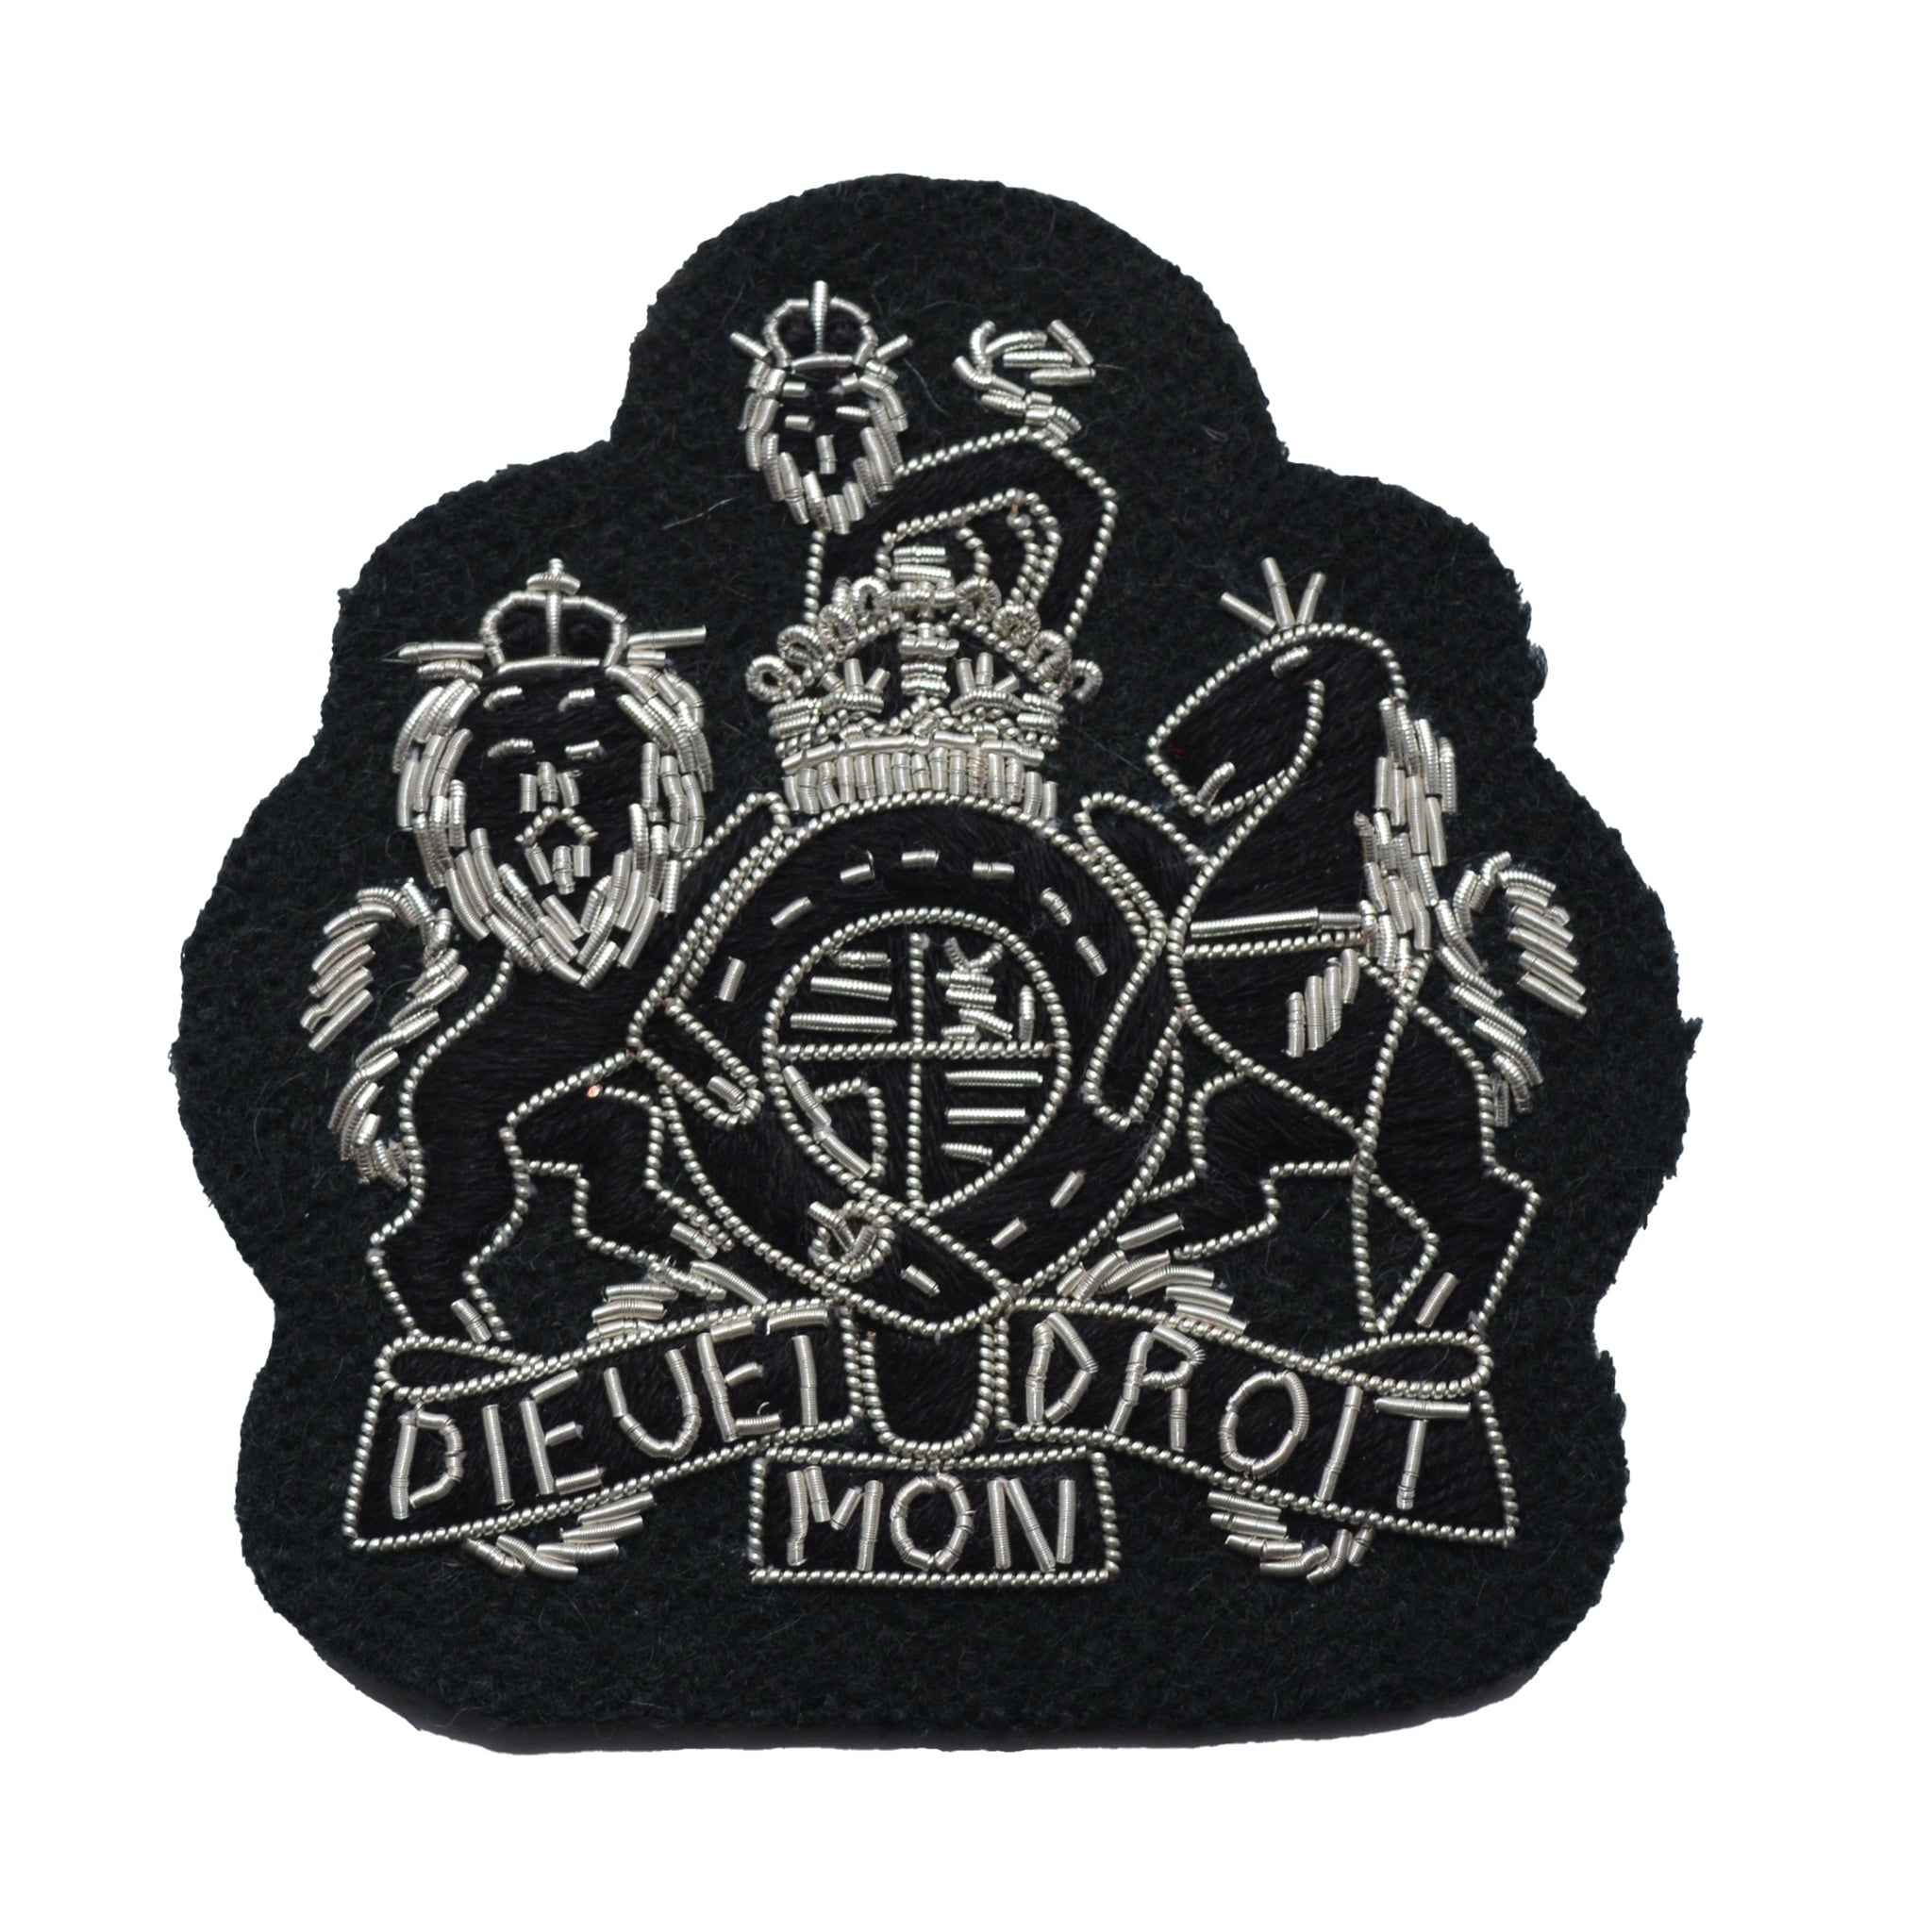 (Kings Crown) Warrant Officer Class 1 (WO1) Royal Arms Rank Badge The Rifles Infantry British Army Insignia Badge